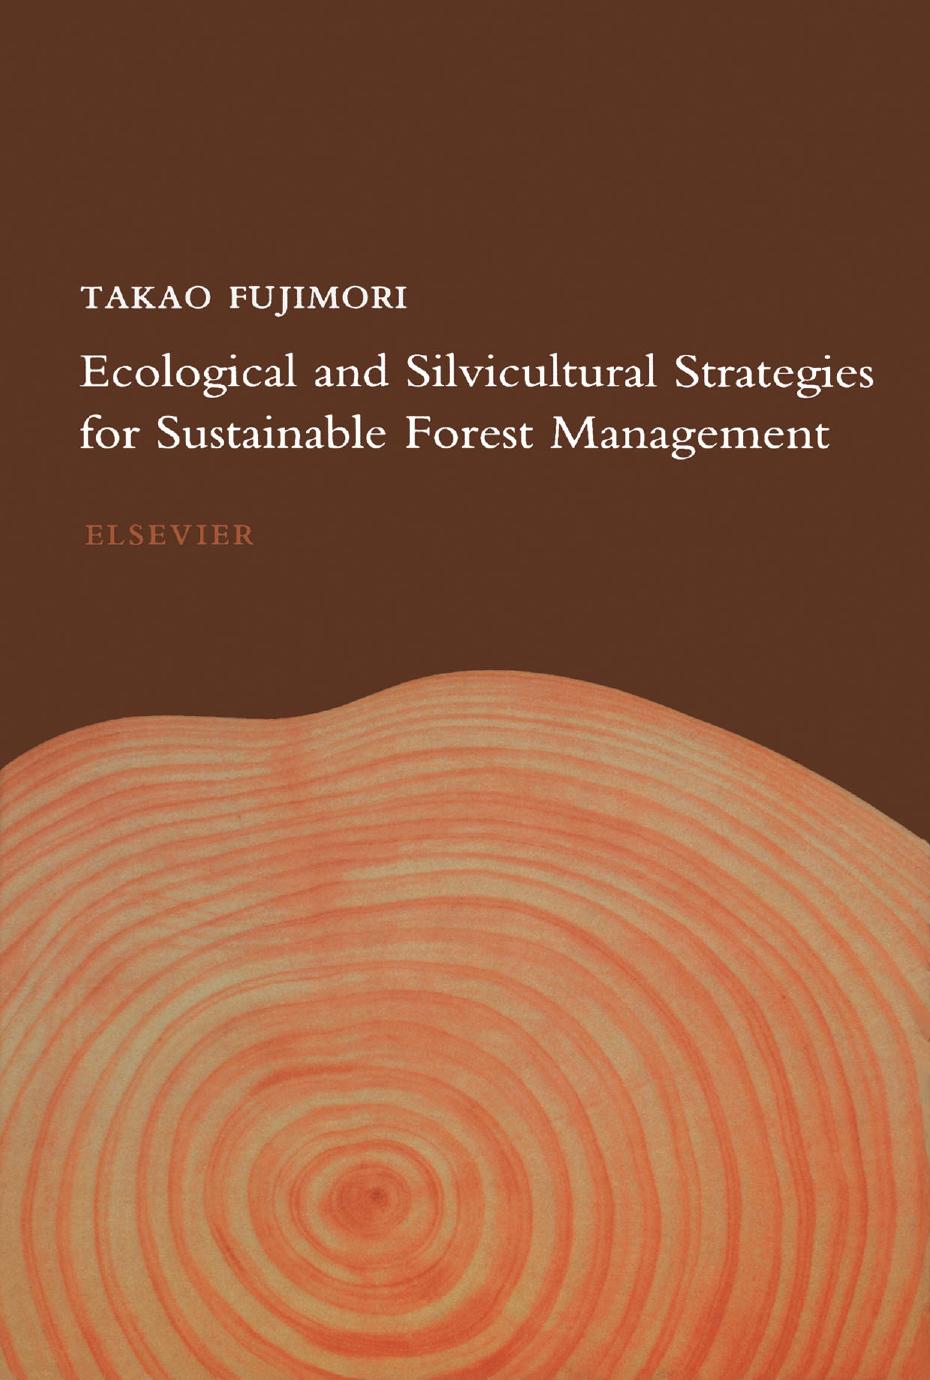 Ecological and Silvicultural Strategies for Sustainable Forest Management 2001